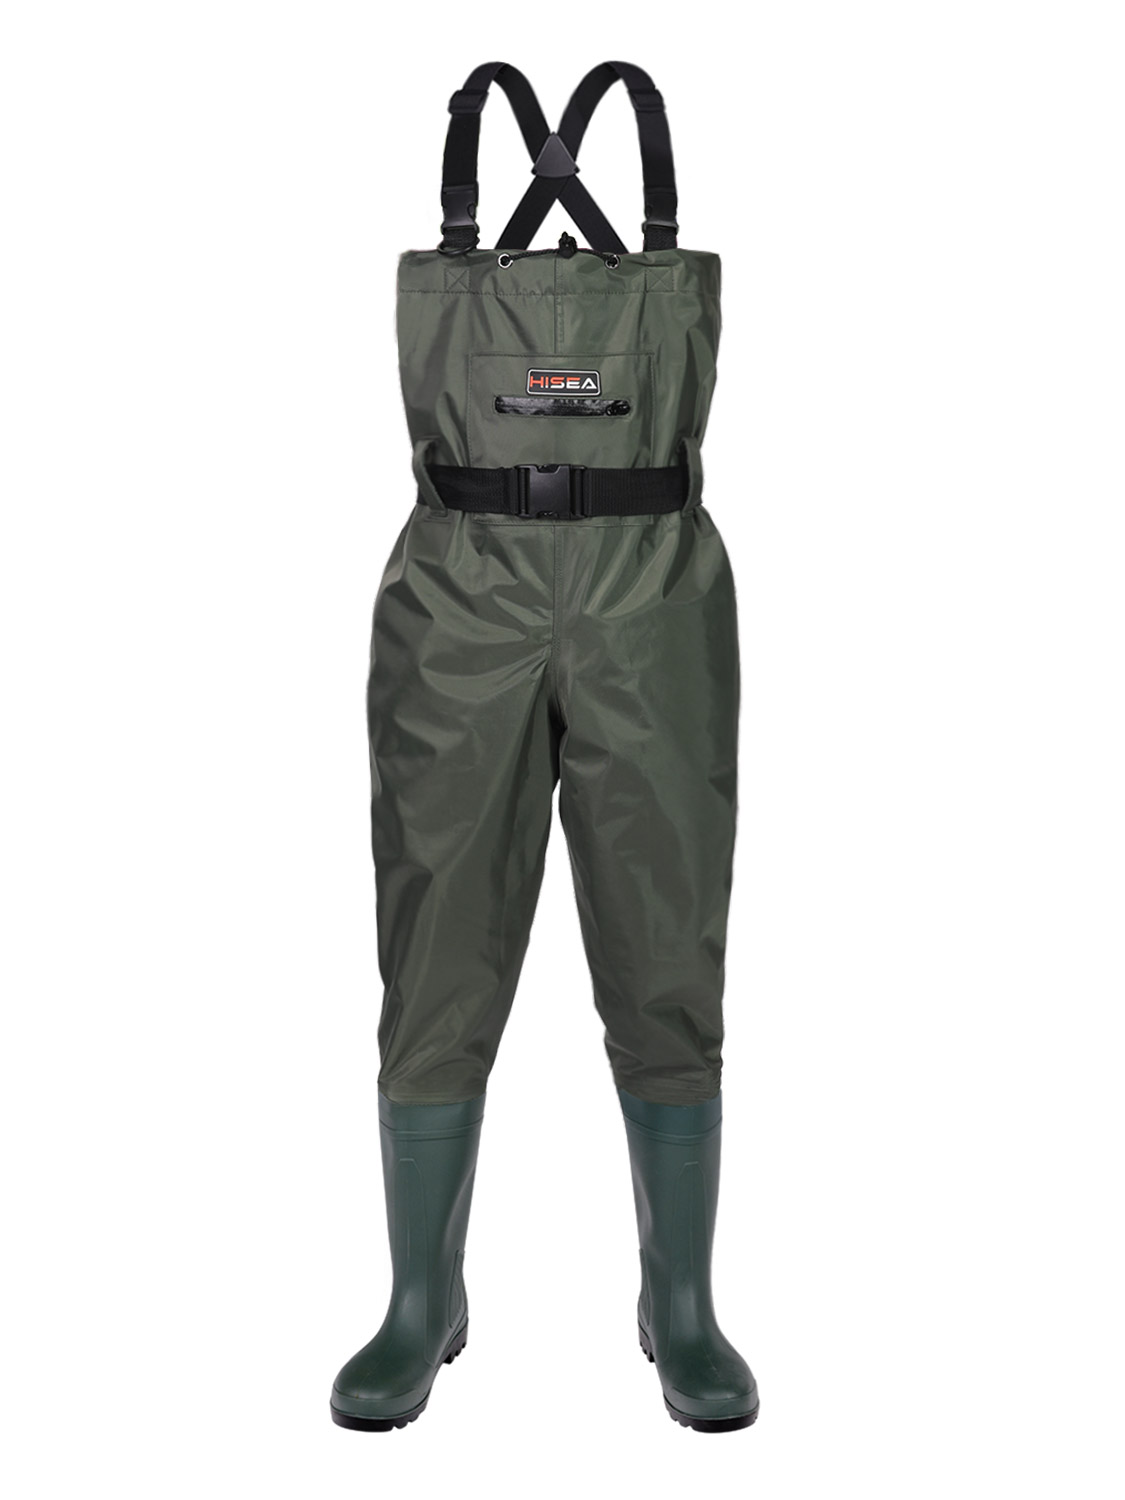 OXYVAN Hip Waders Lightweight Fishing Waders for Men Women with Boots 2-Ply PVC/Nylon Waders for Women Men with Boots Green and Brown